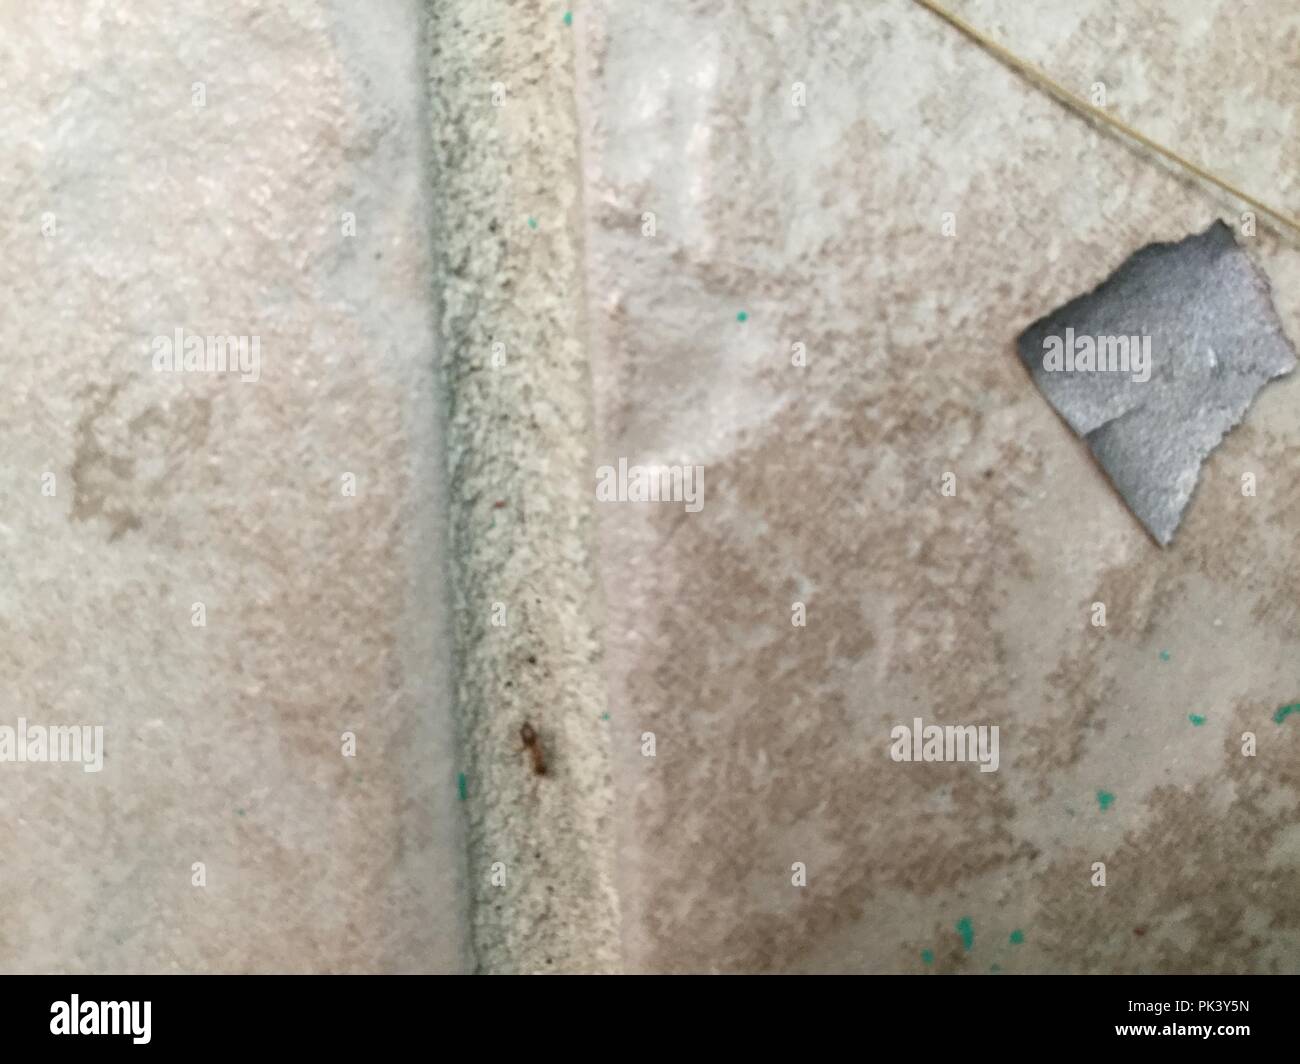 Chipped tile and grout. Stock Photo